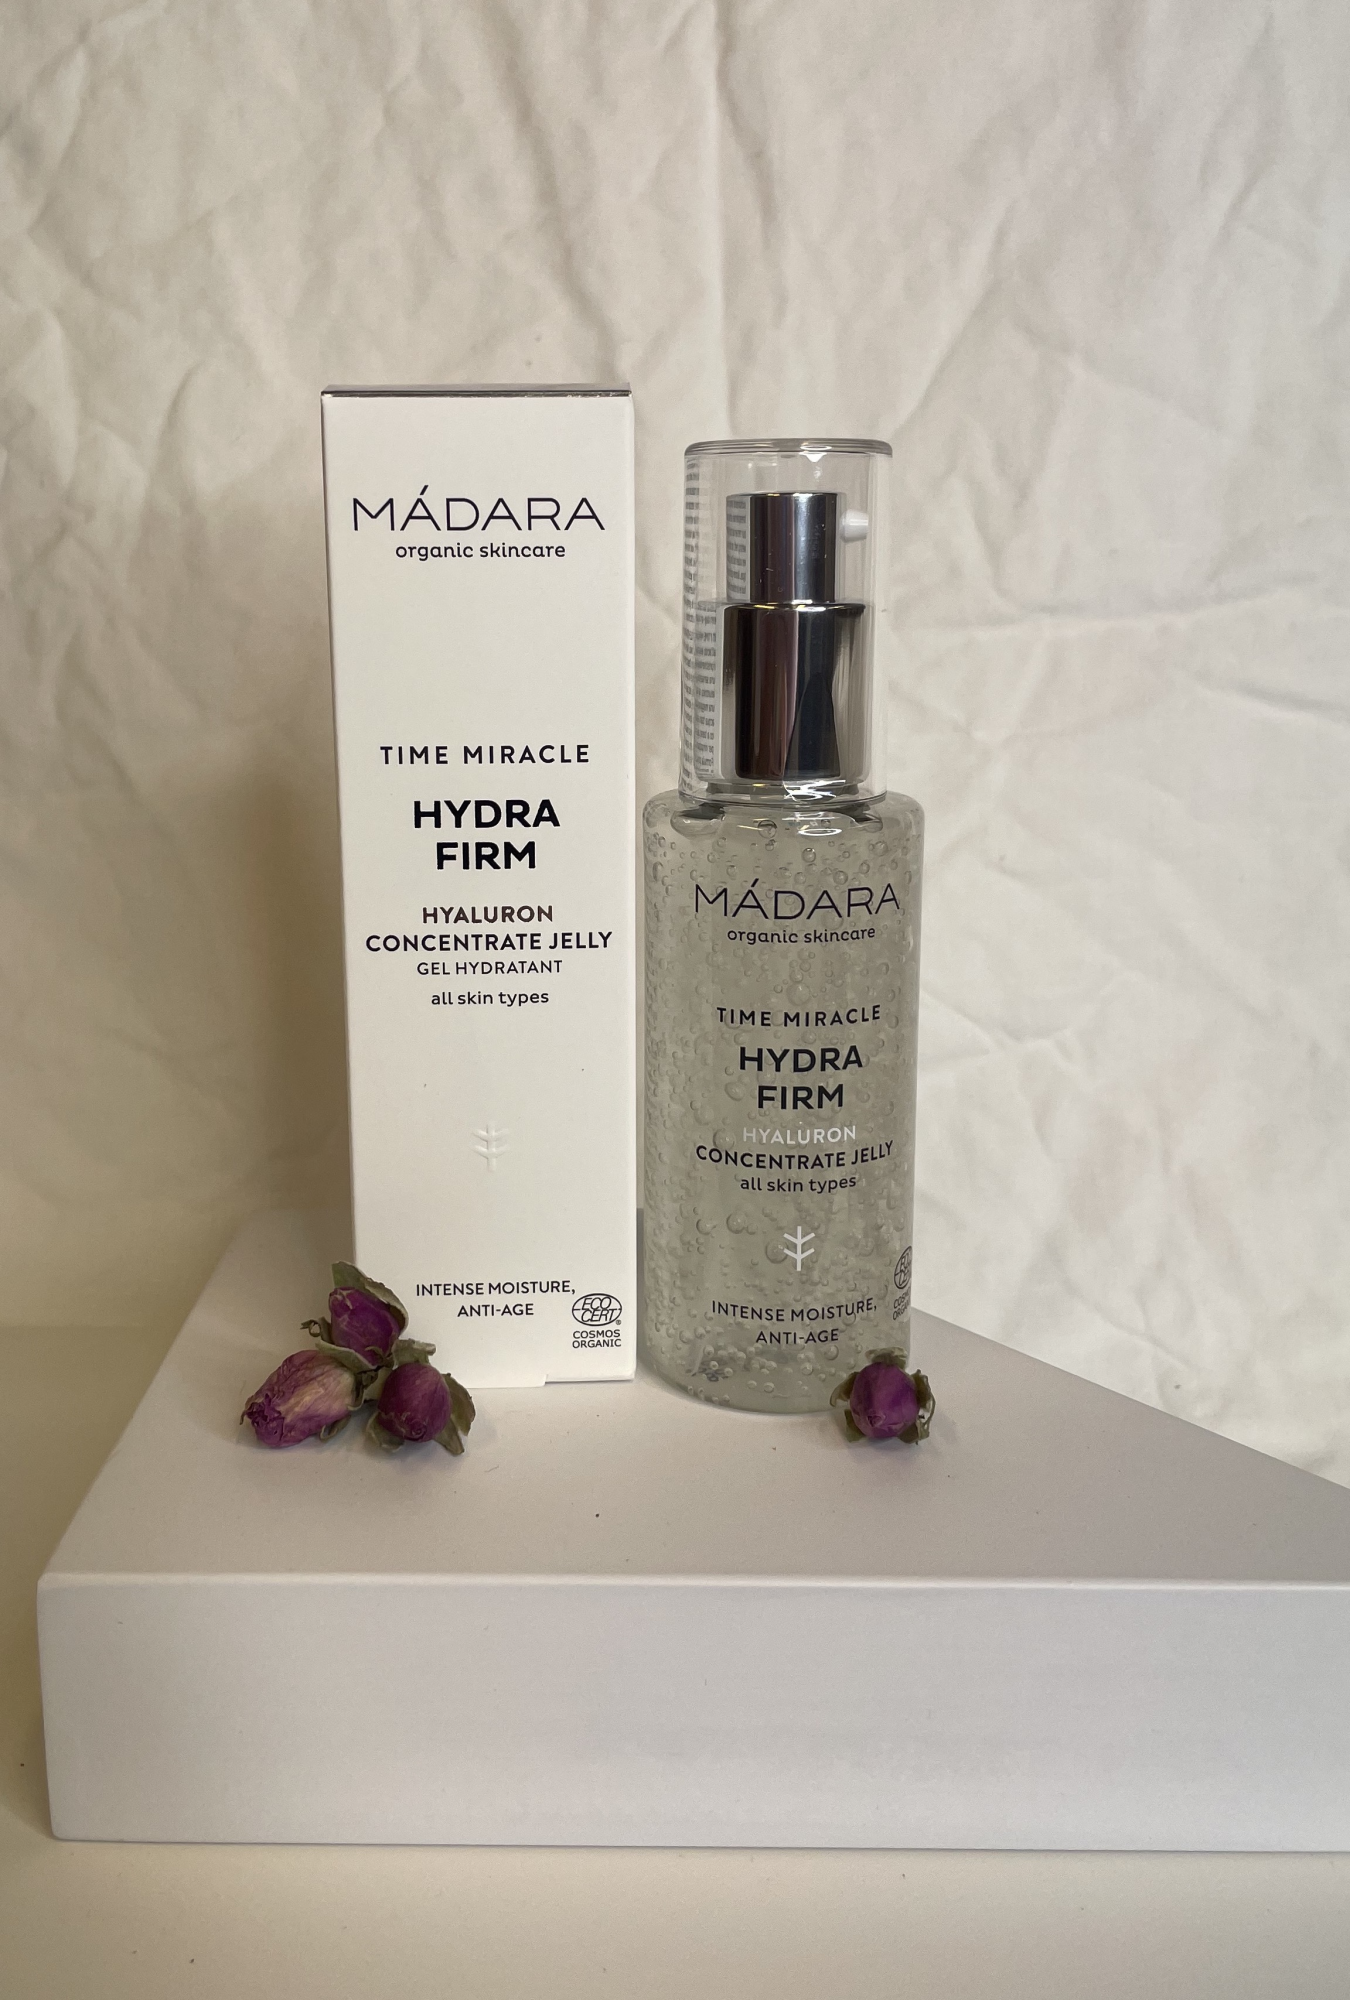 Billede af MADARA TIME MIRACLE Hydra Firm Hyaluron Concentrate Jelly